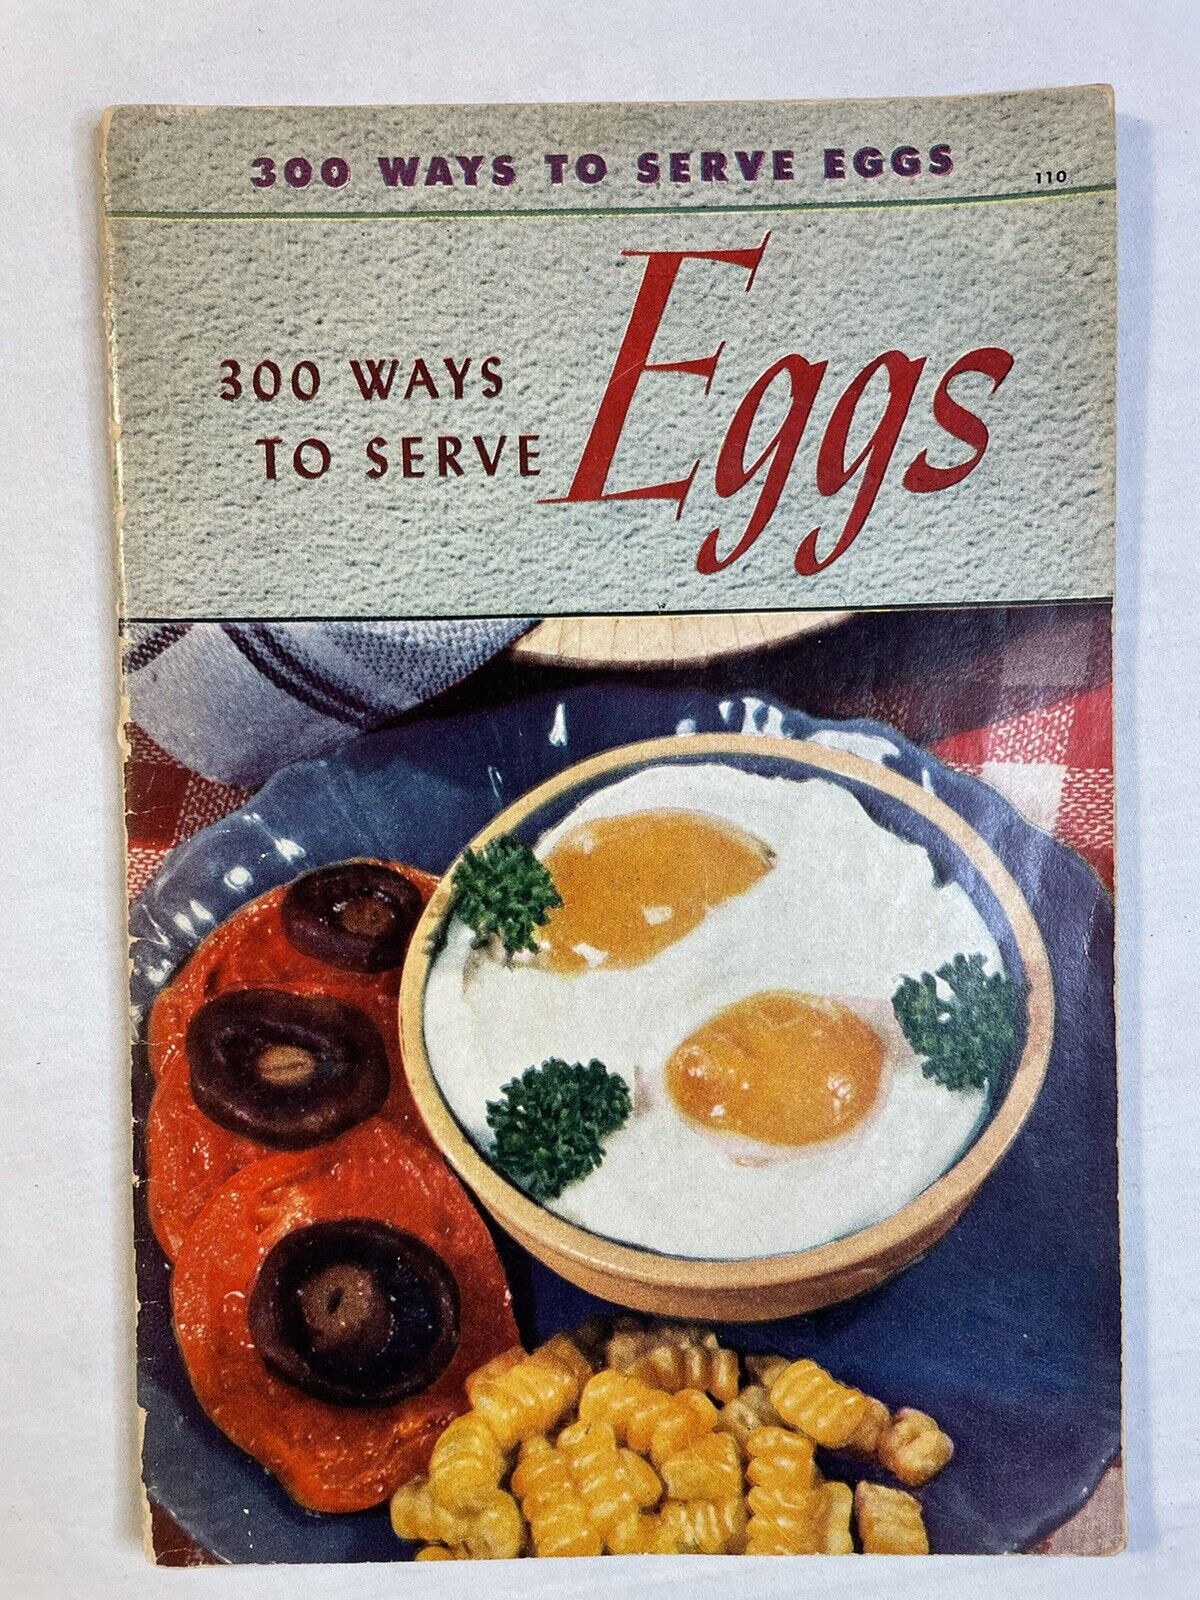 300 Ways to Serve Eggs by Culinary Arts Institute 1940 